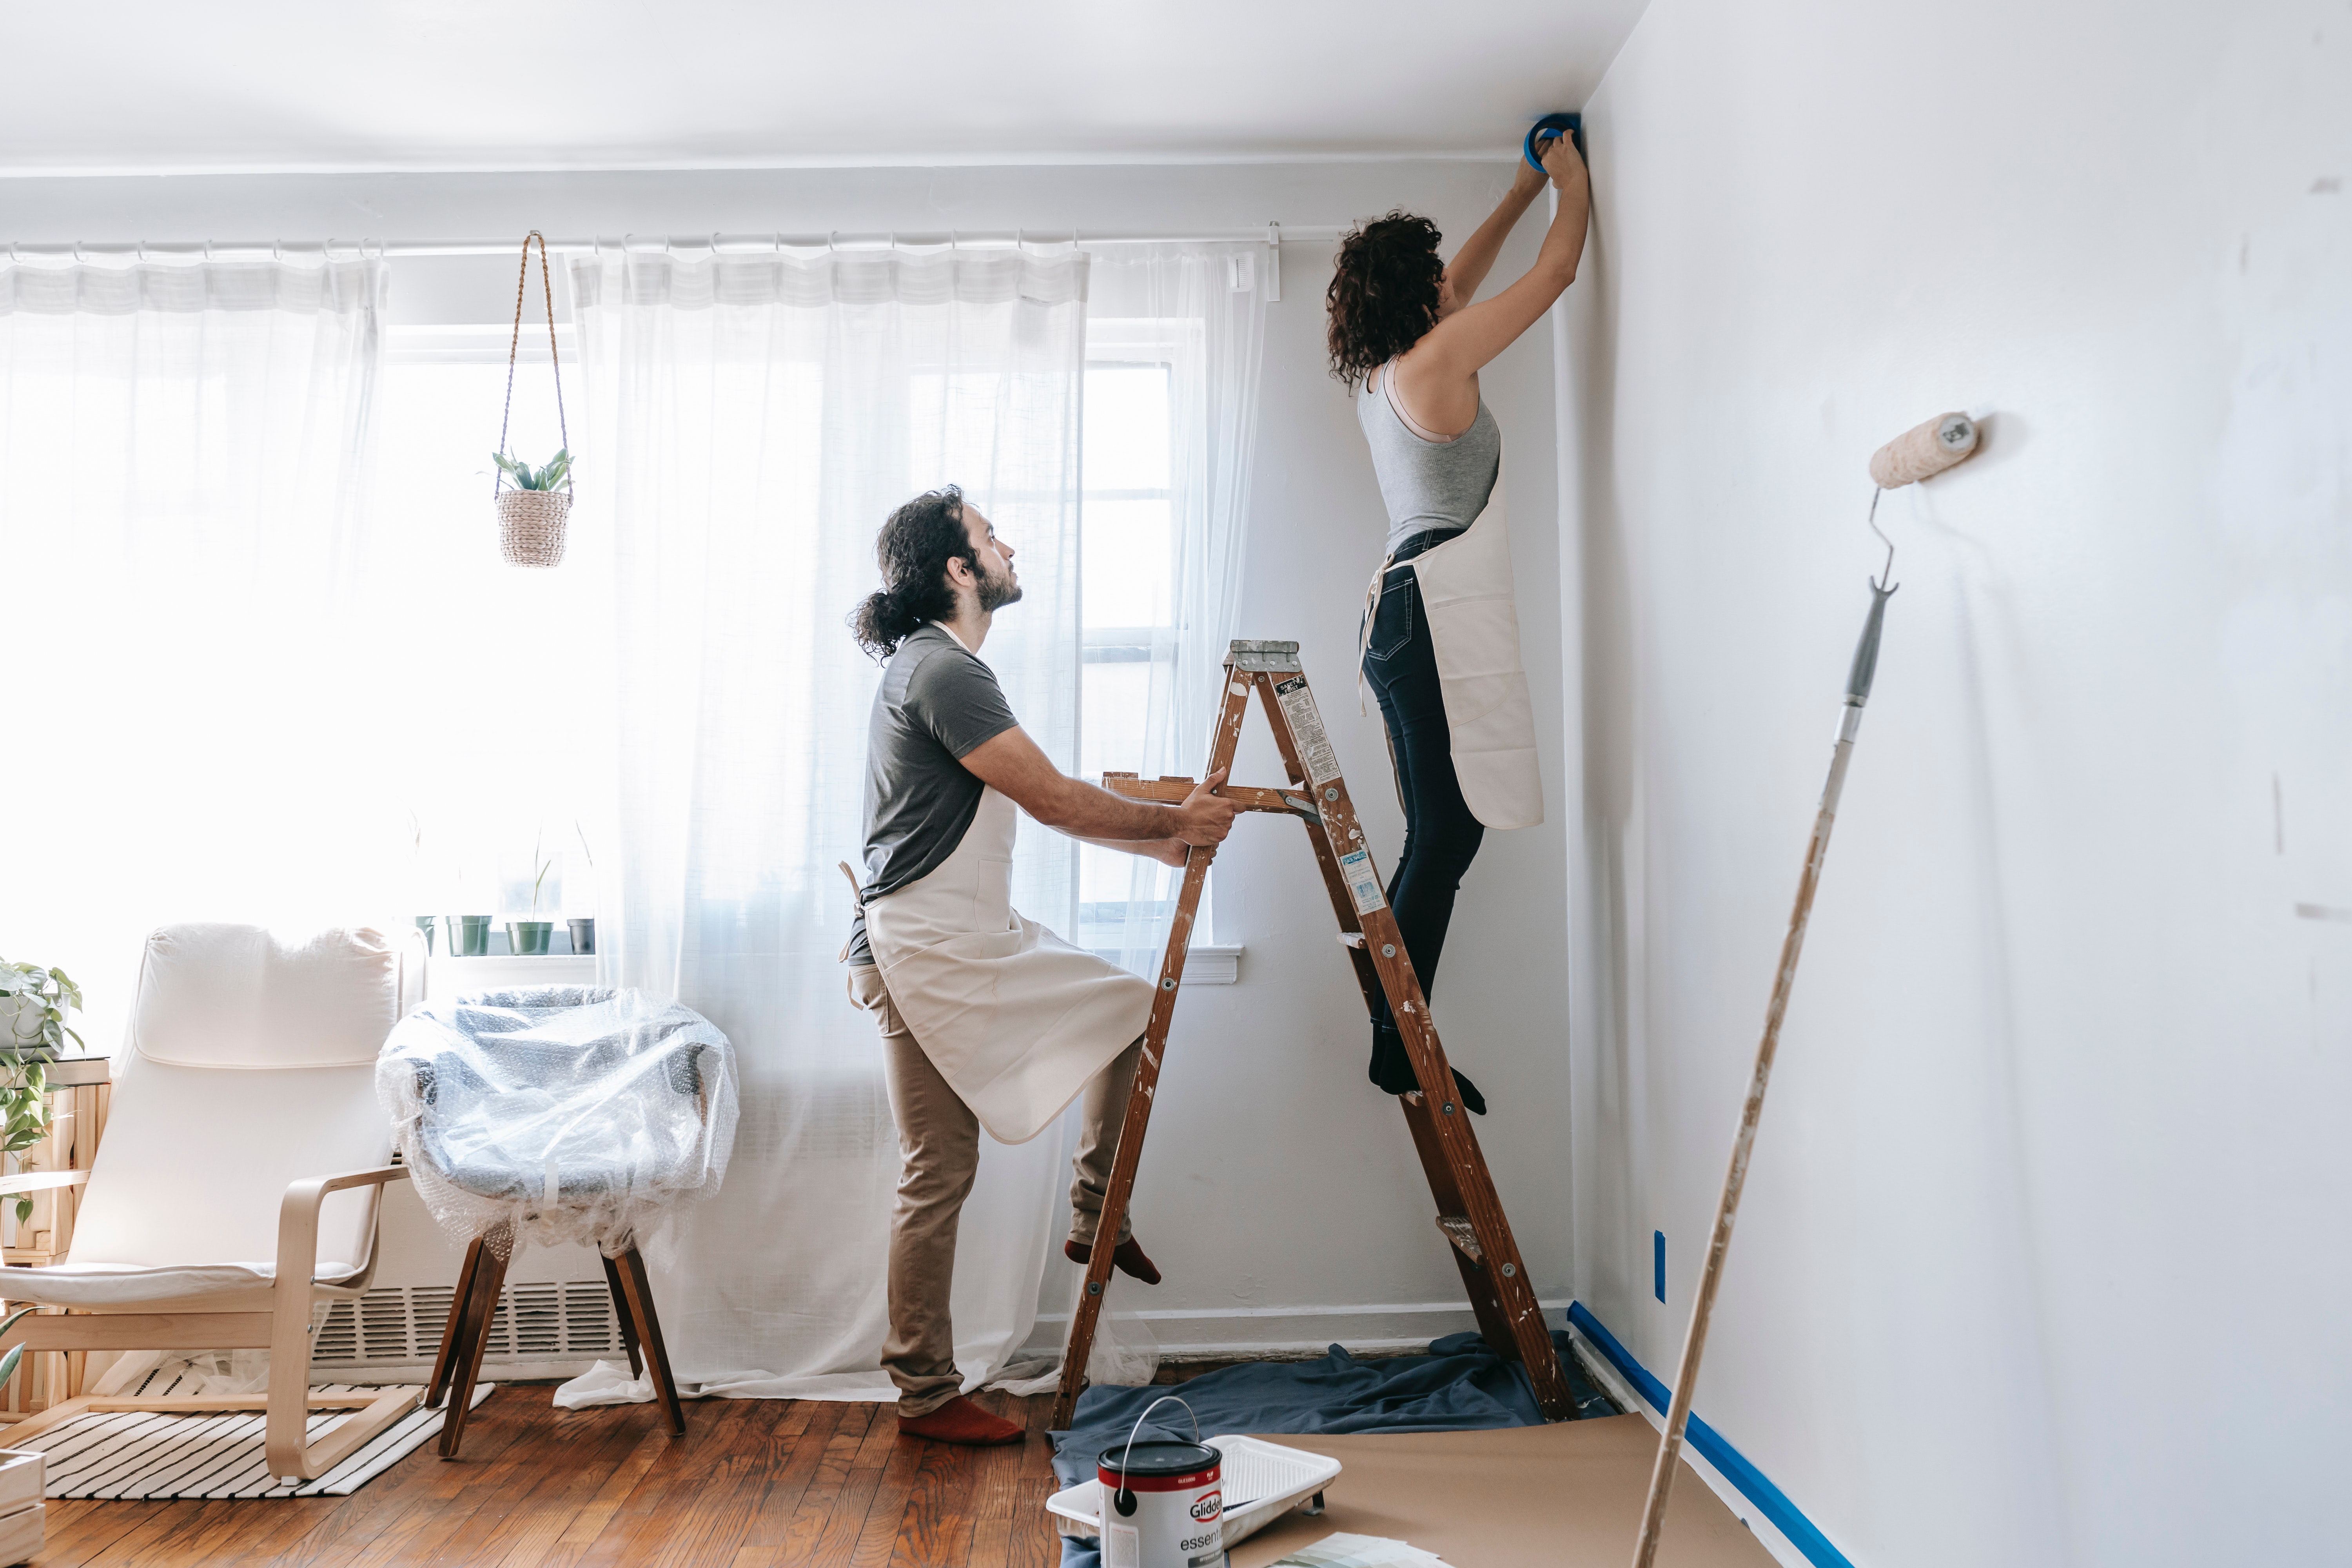 Building costs have soared. Is it time to abandon my home renovation plans?